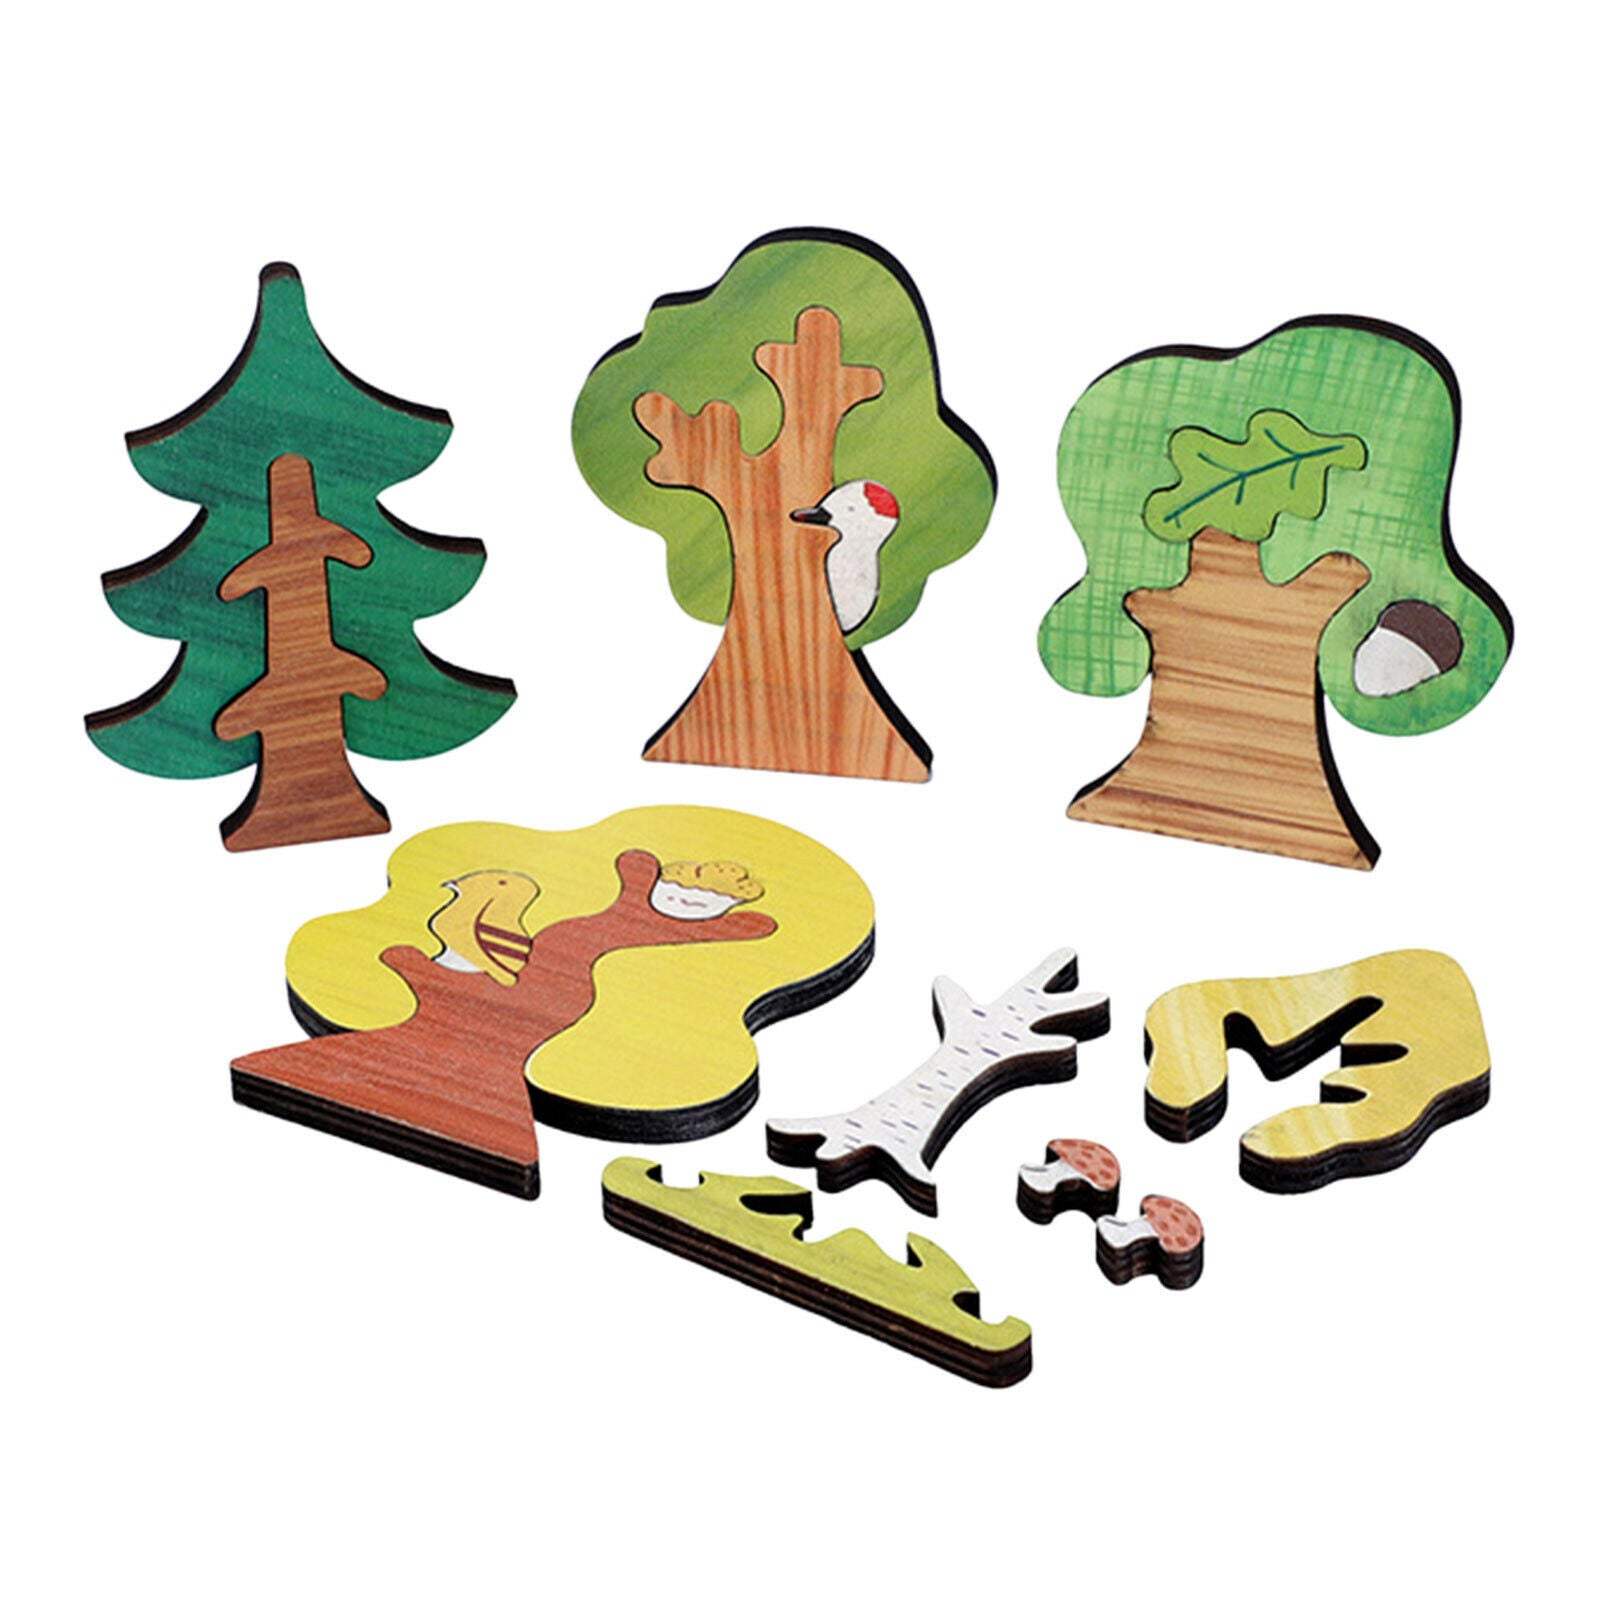 Wooden Pieces Puzzle Shapes Pattern Blocks Puzzles Educational Toys